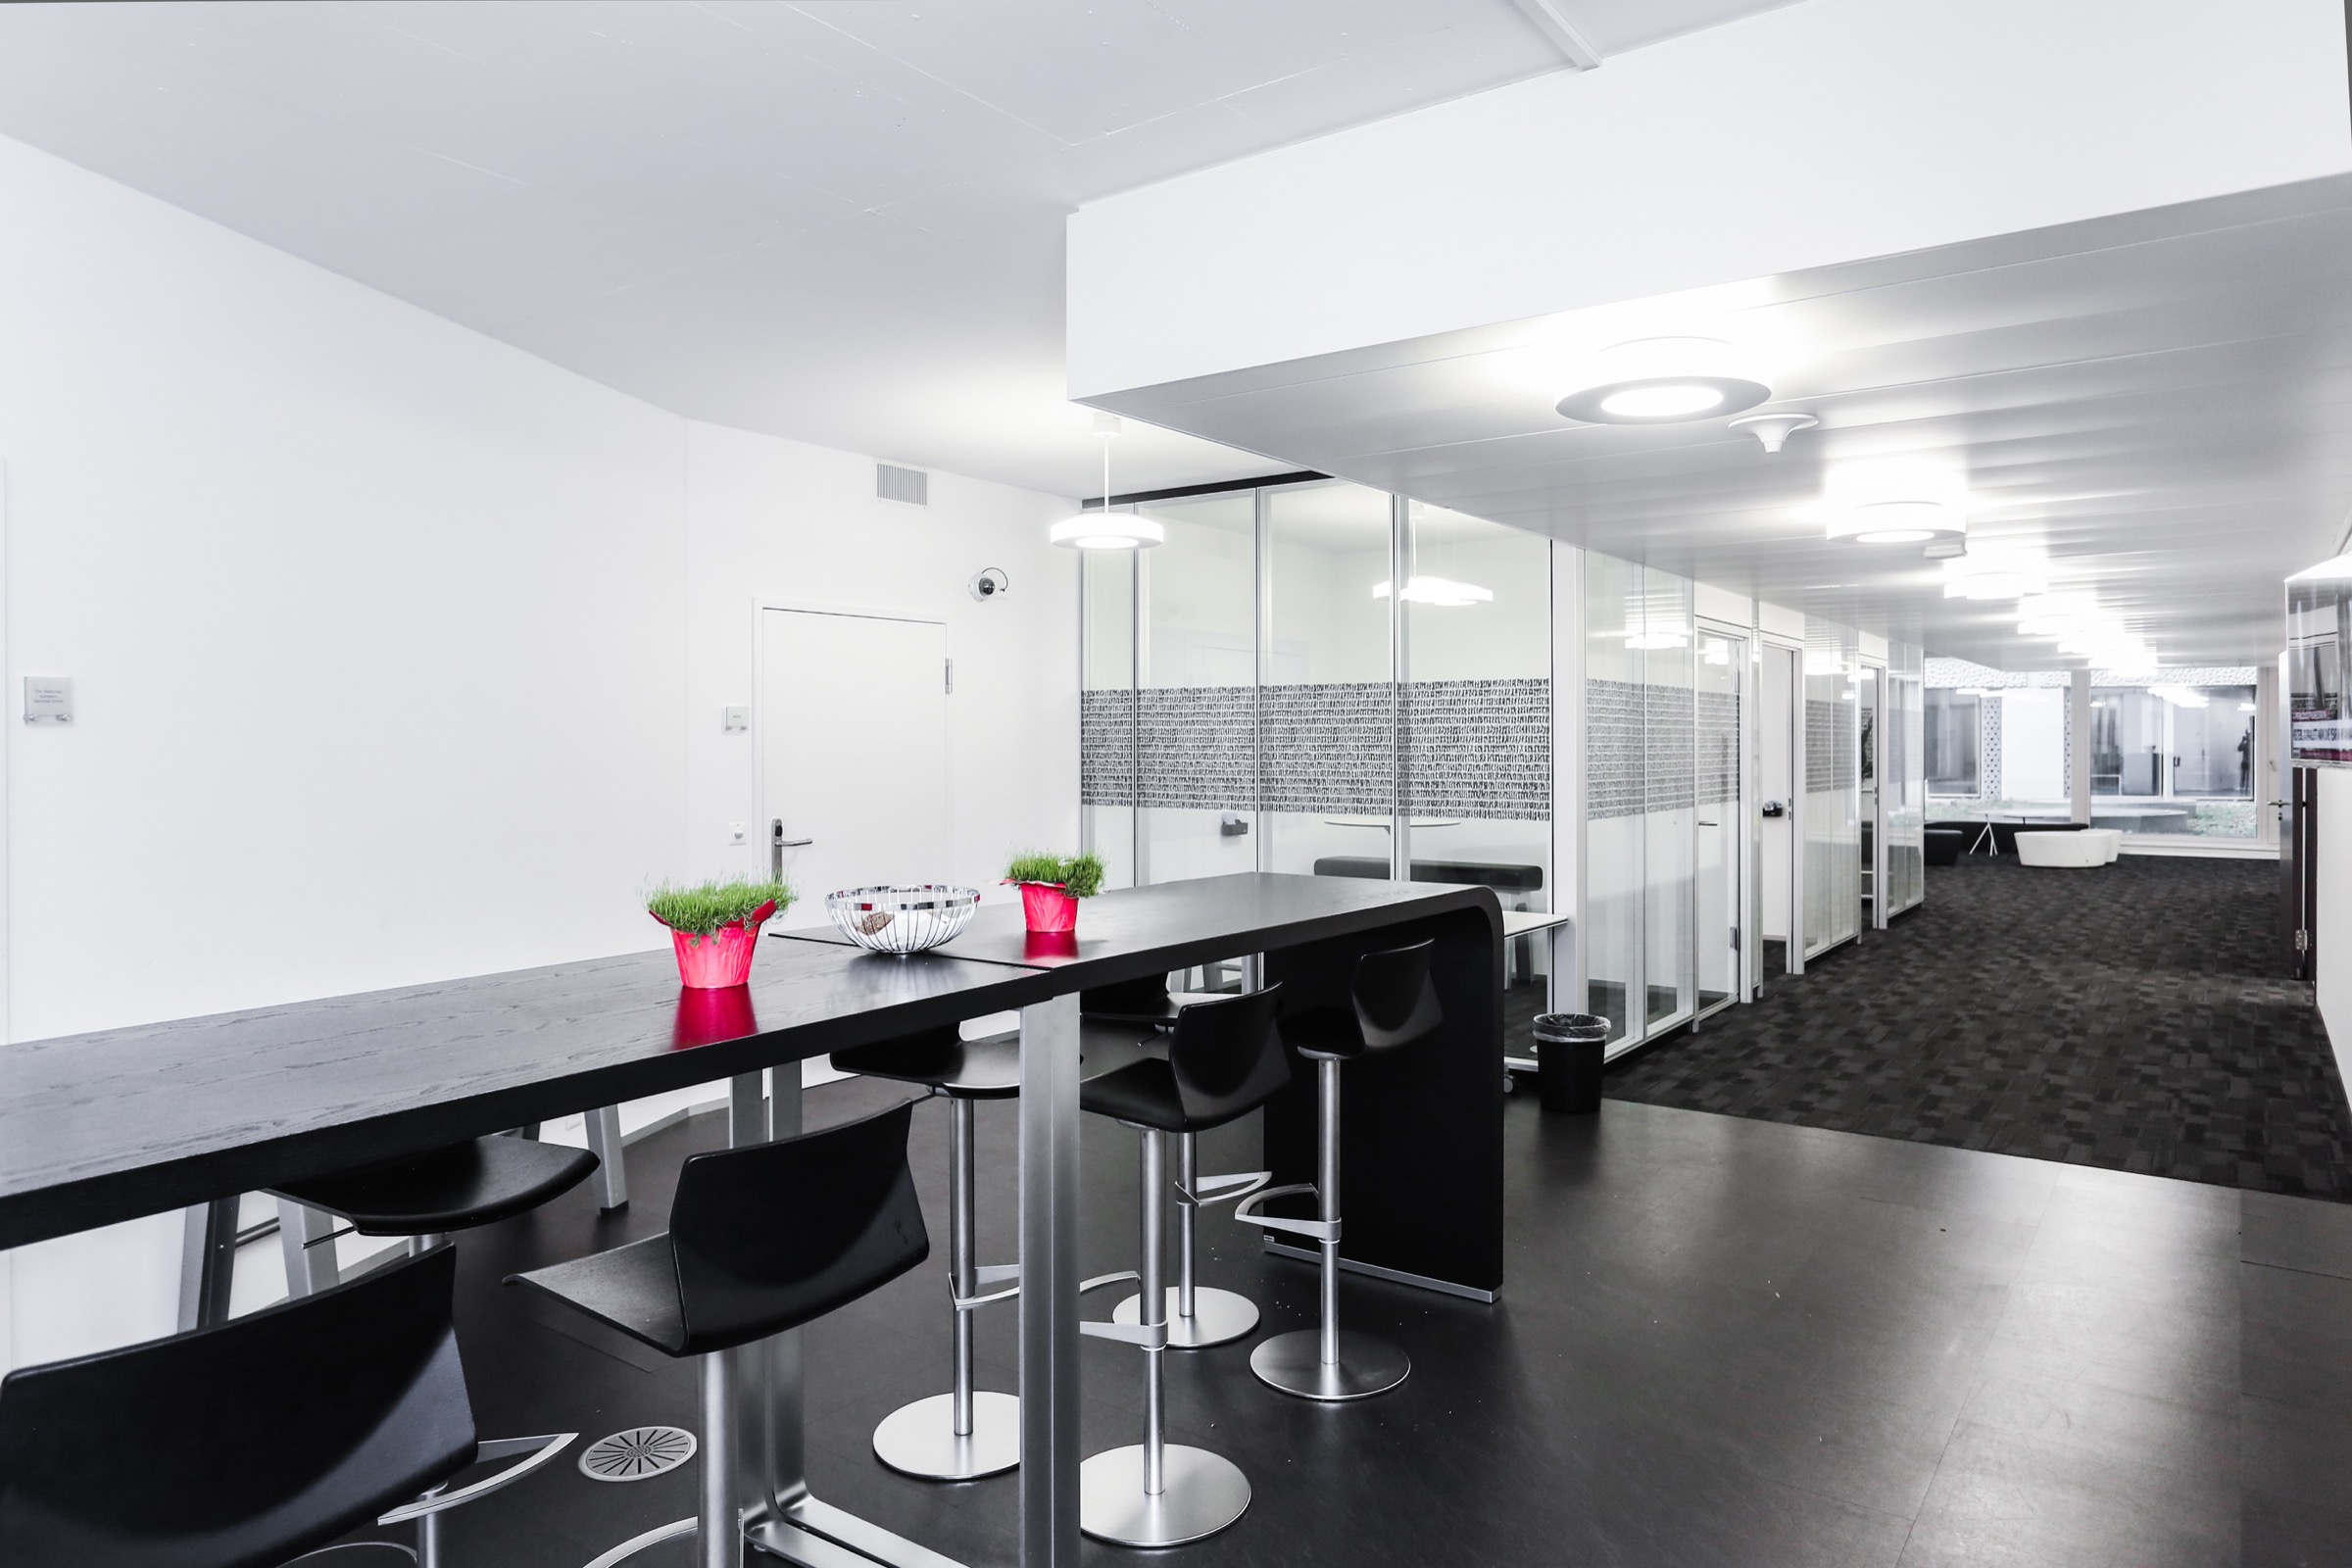 Rent an individual office in Zurich with meeting space and a productive working atmosphere